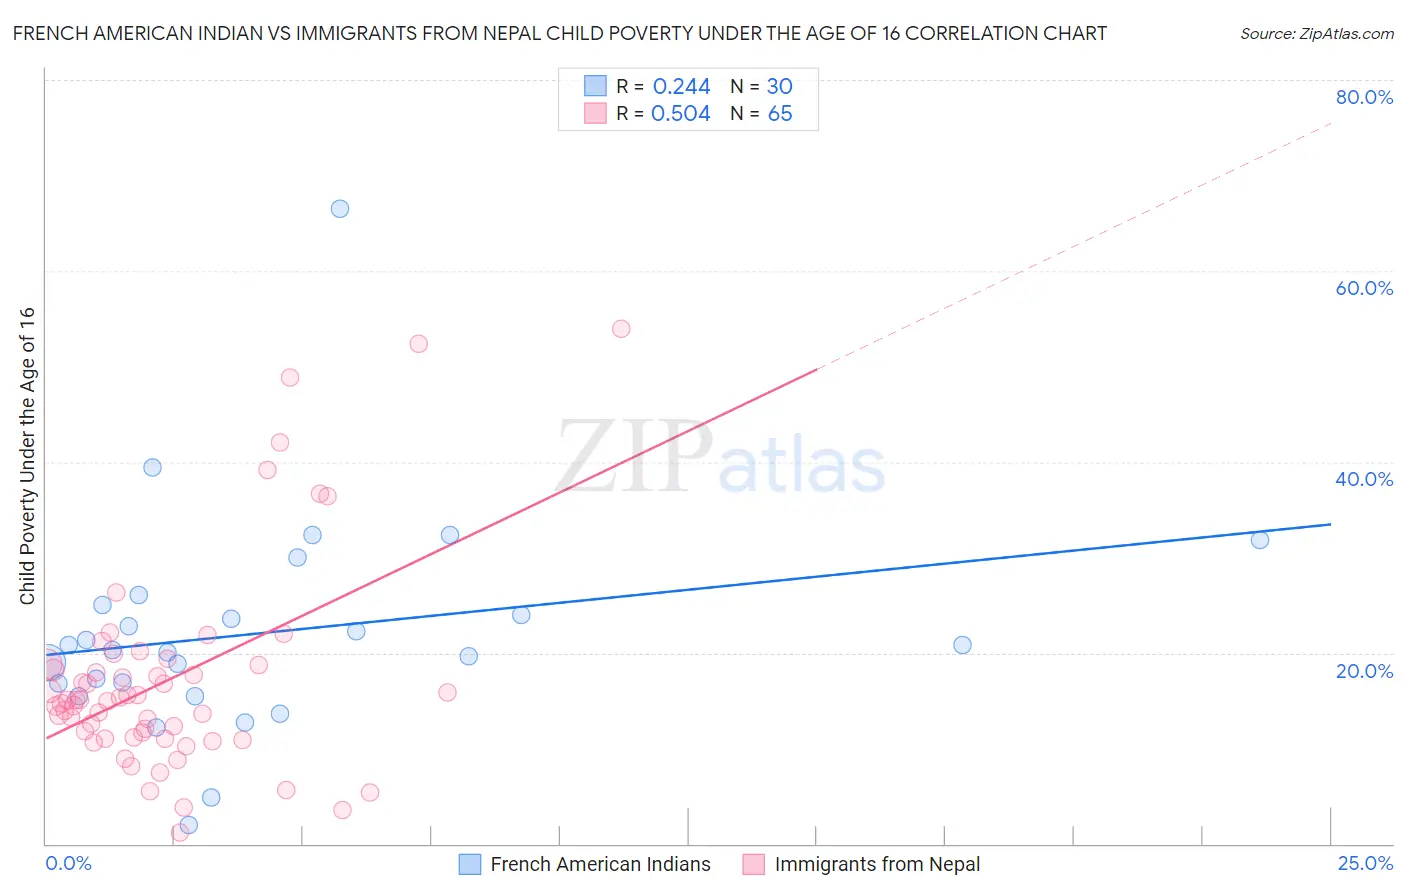 French American Indian vs Immigrants from Nepal Child Poverty Under the Age of 16